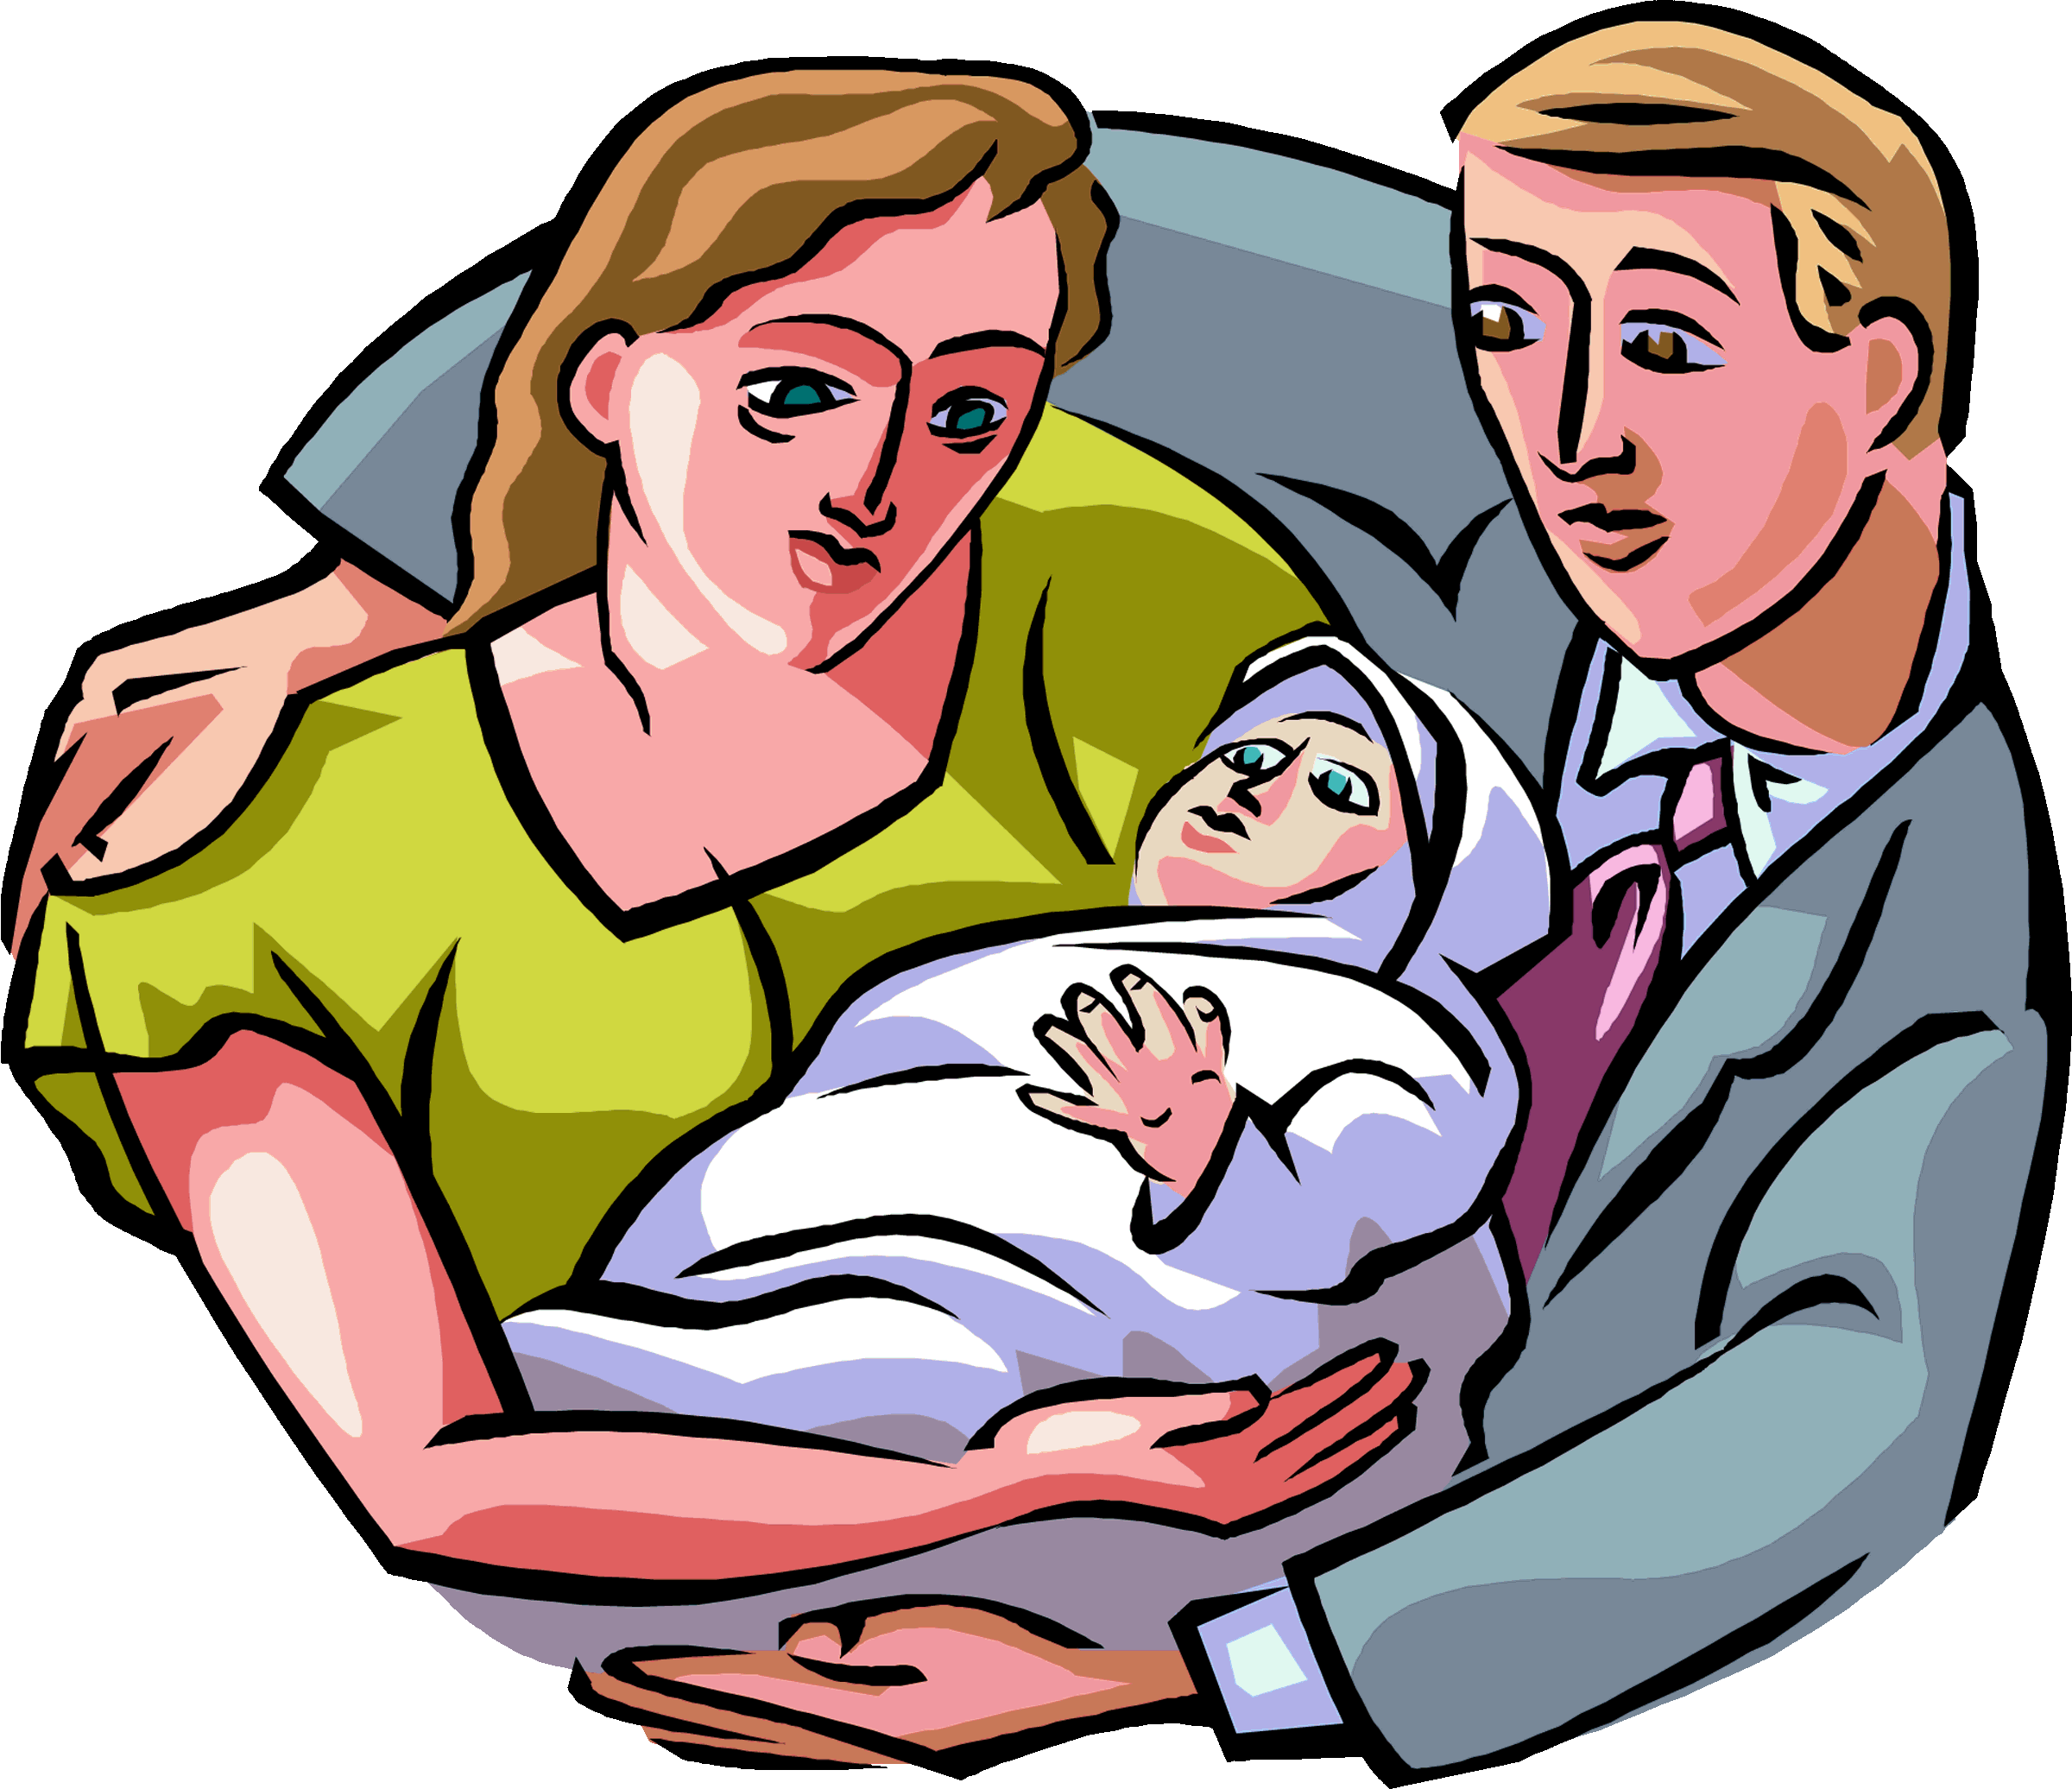 father clipart normal person